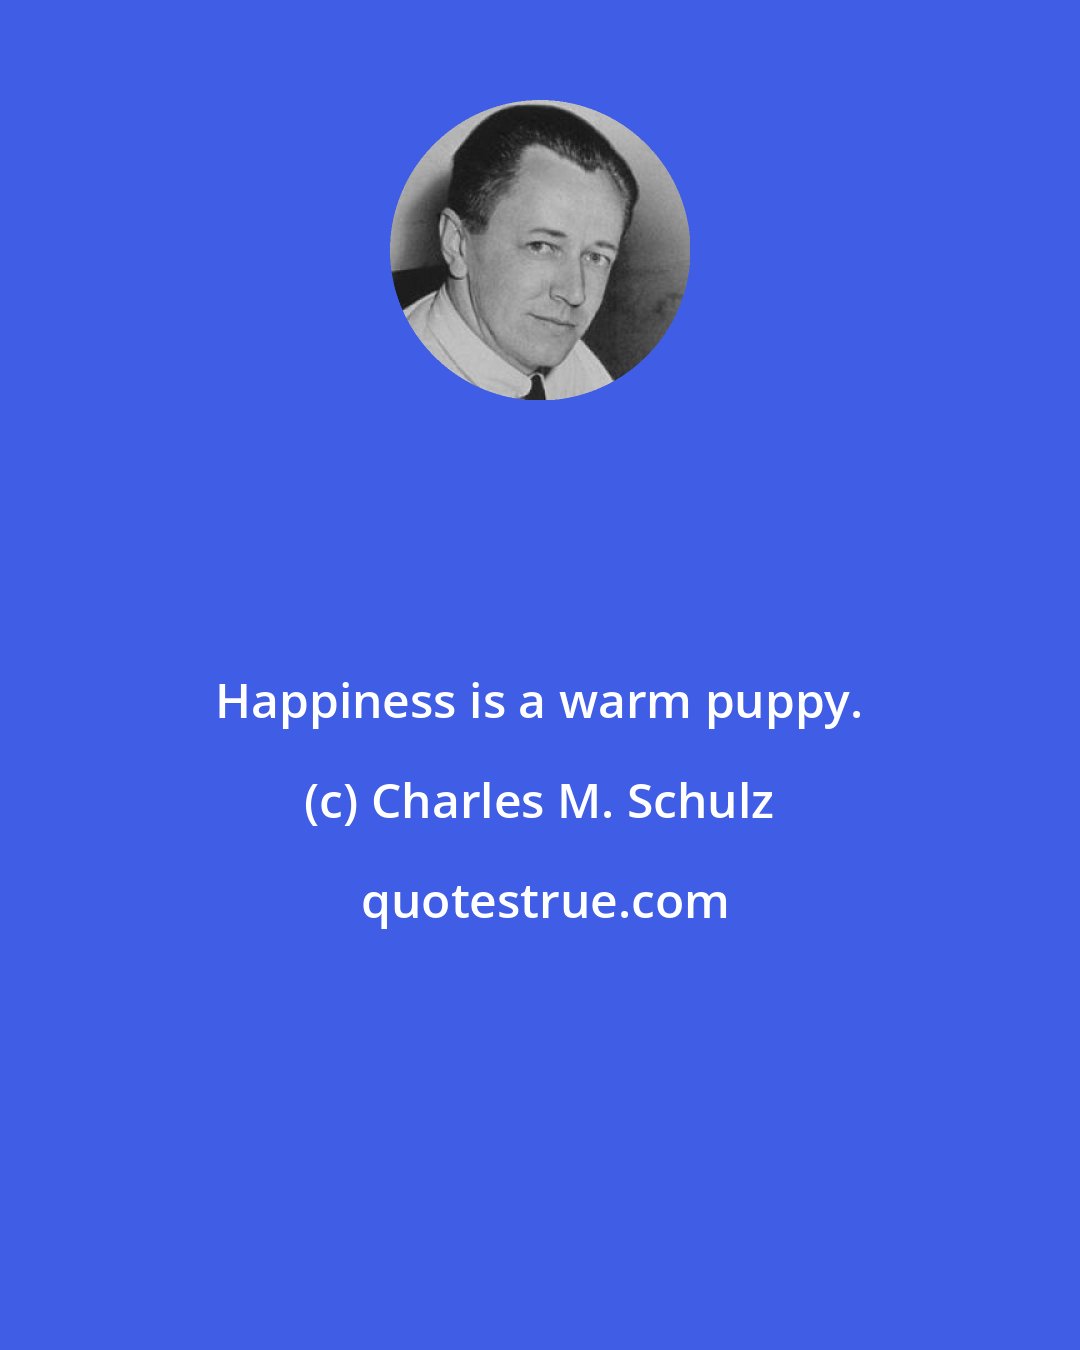 Charles M. Schulz: Happiness is a warm puppy.